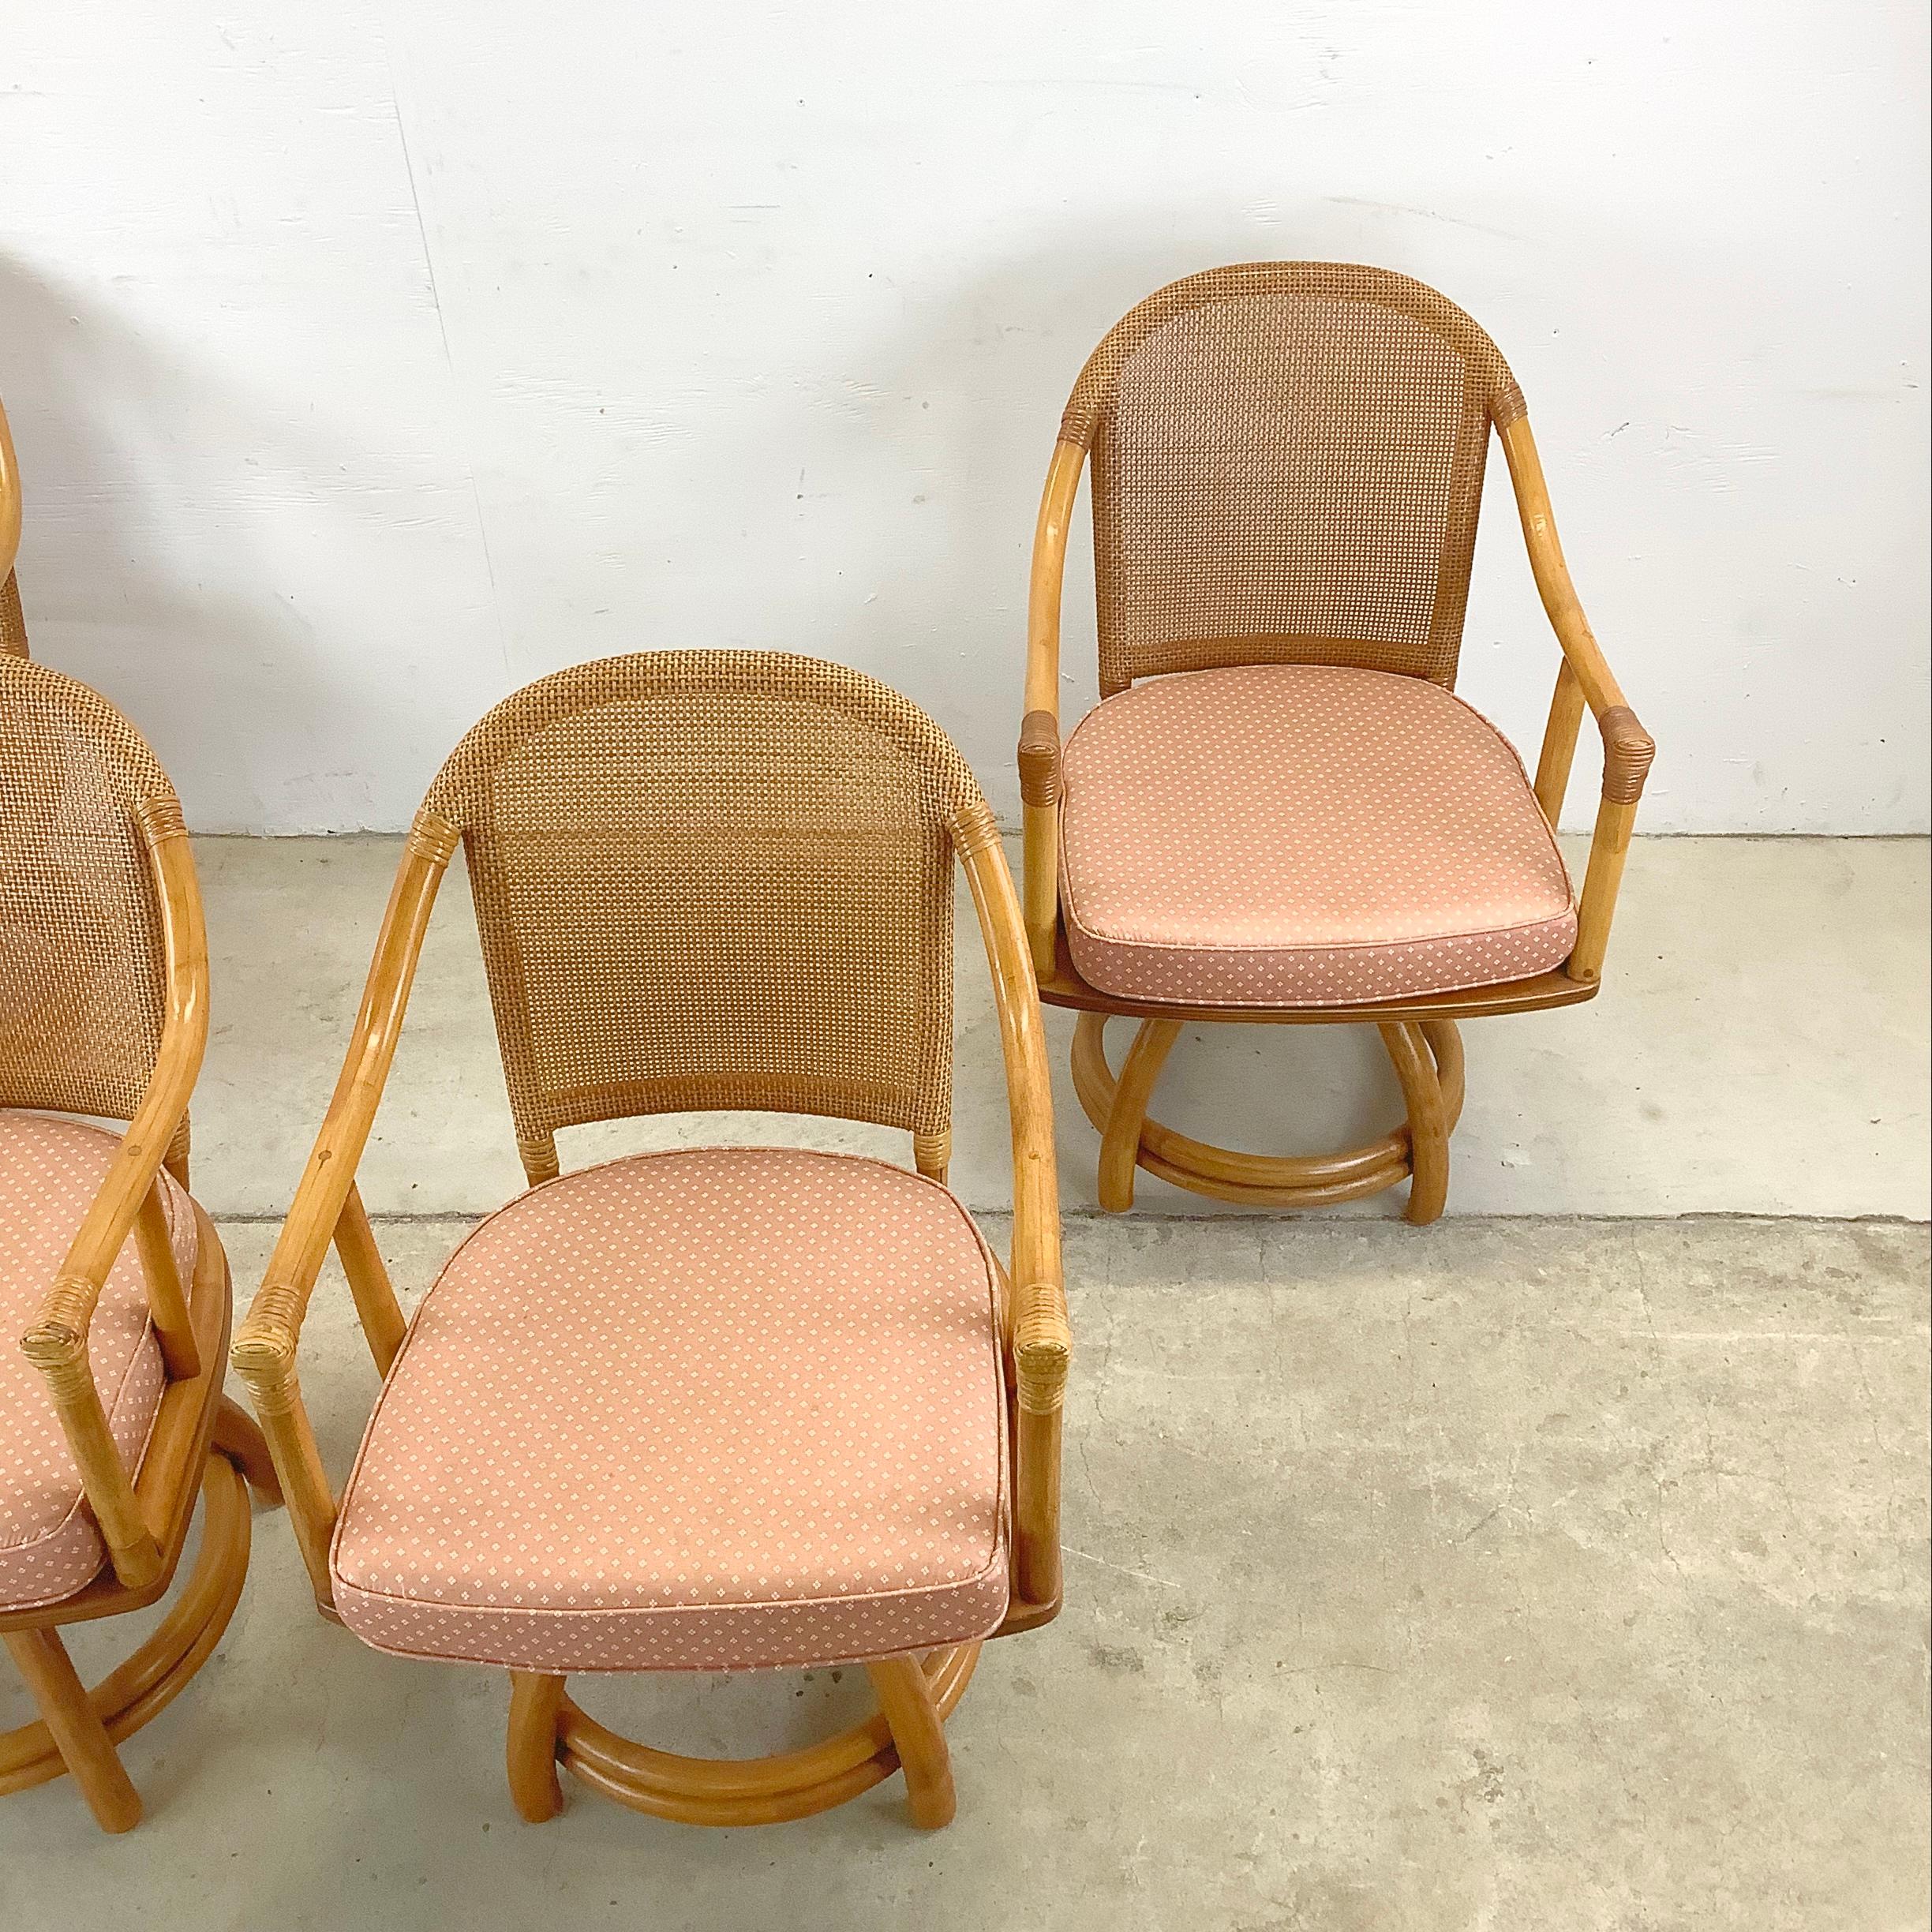 20th Century Vintage Rattan Swivel Chairs after Ficks Reed- set 4 For Sale